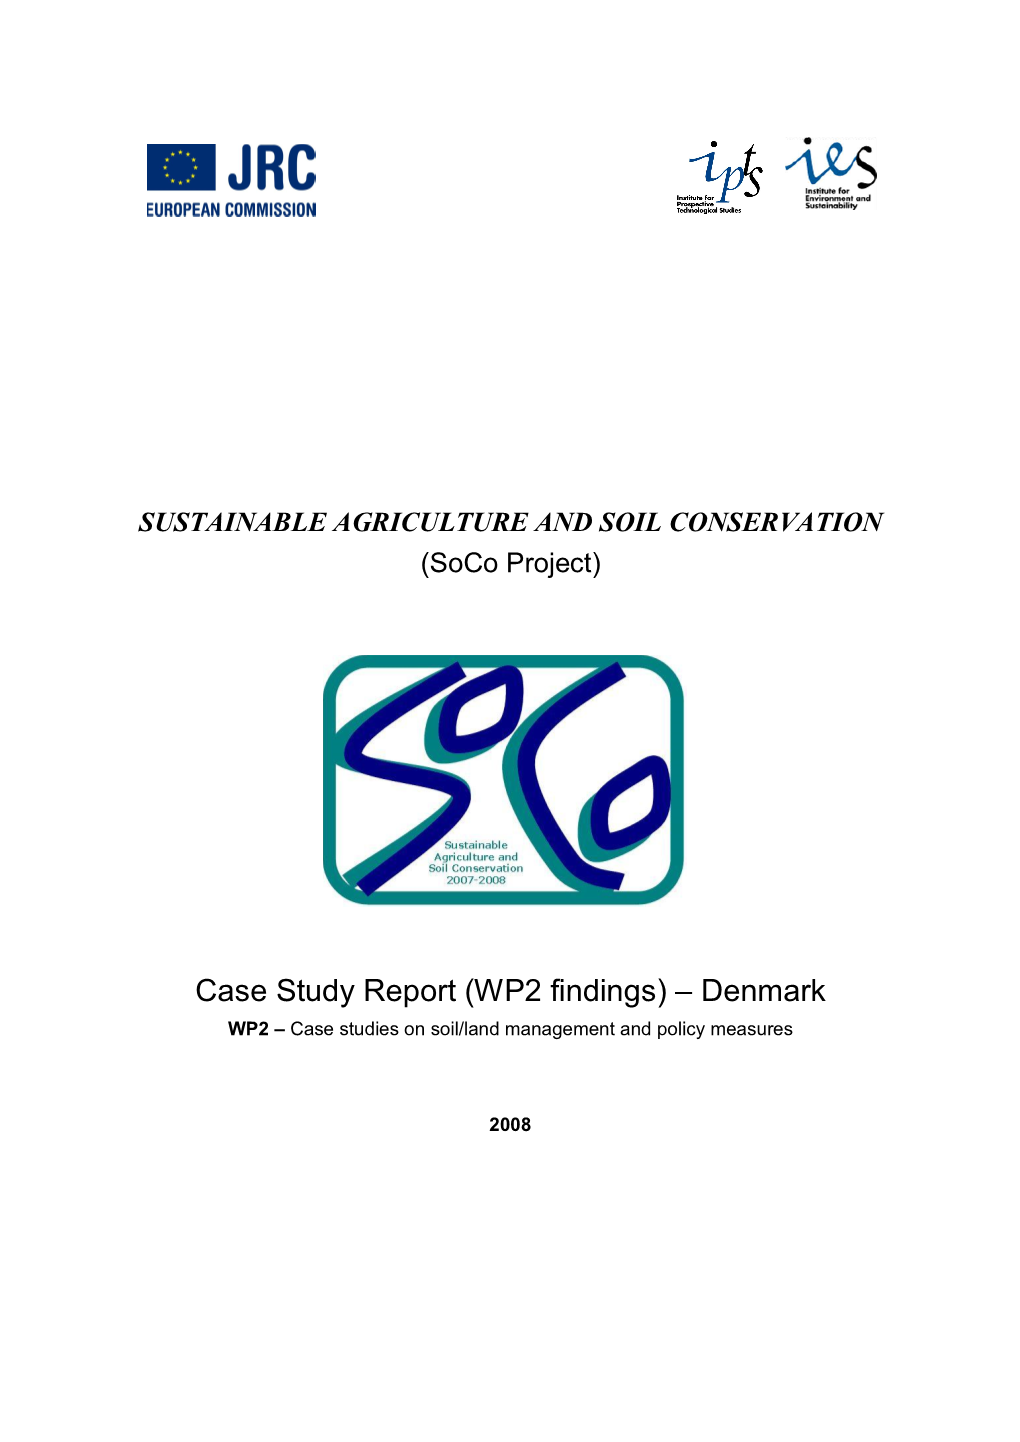 Case Study Report (WP2 Findings) – Denmark WP2 – Case Studies on Soil/Land Management and Policy Measures